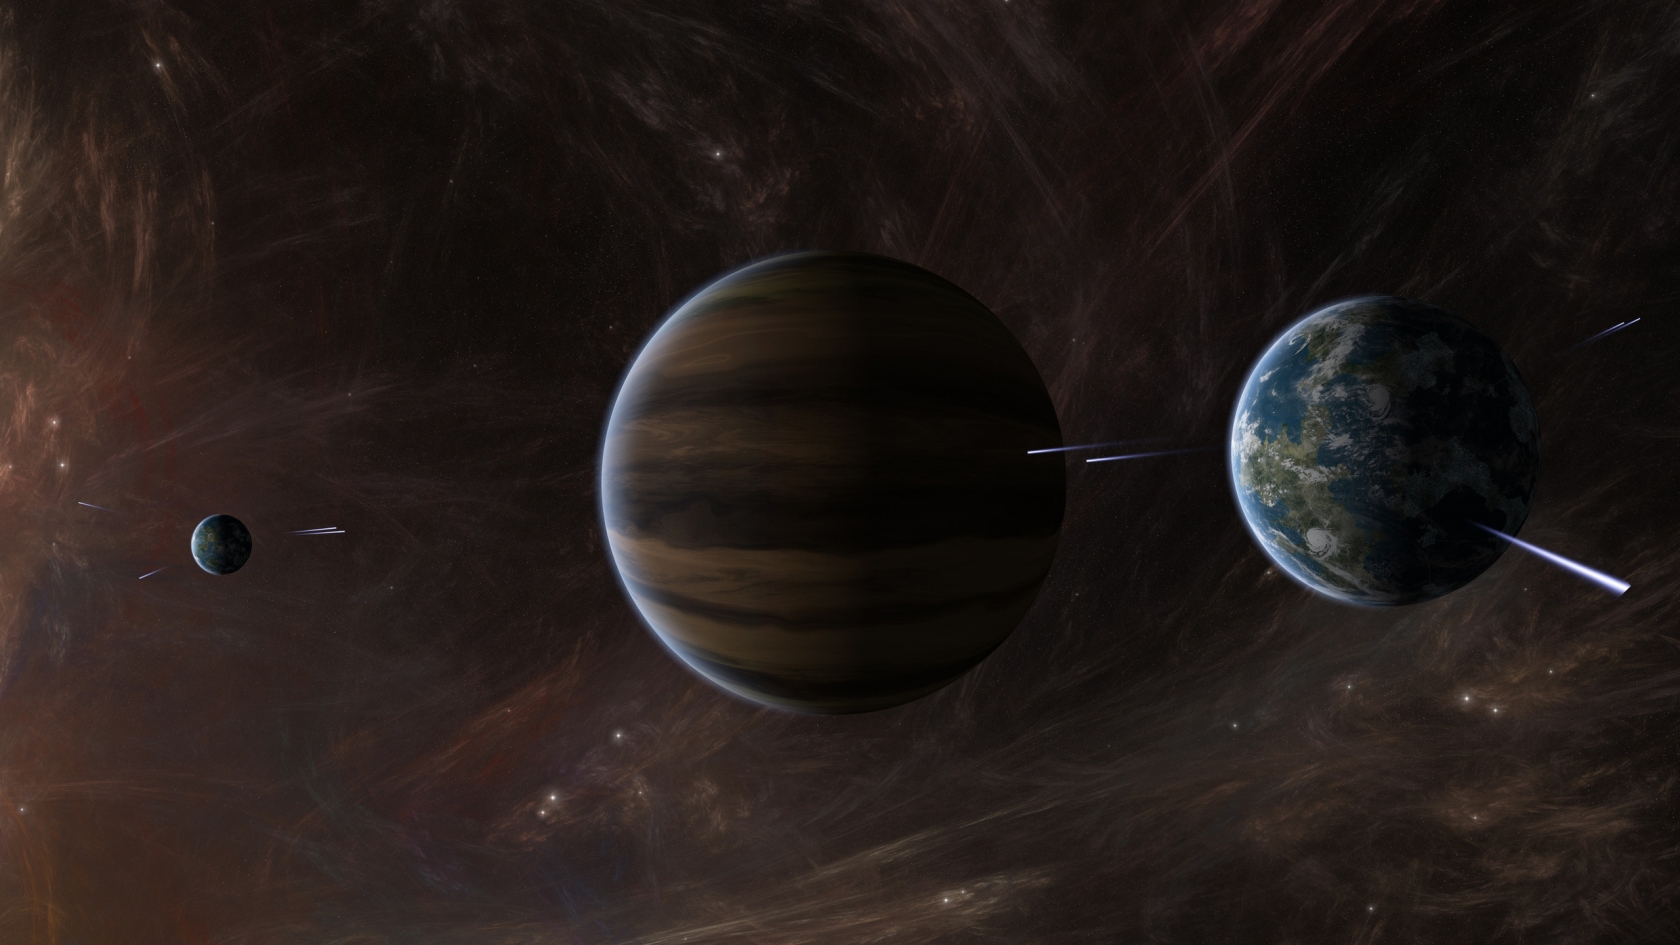 Space Planets Activity for 1680 x 945 HDTV resolution